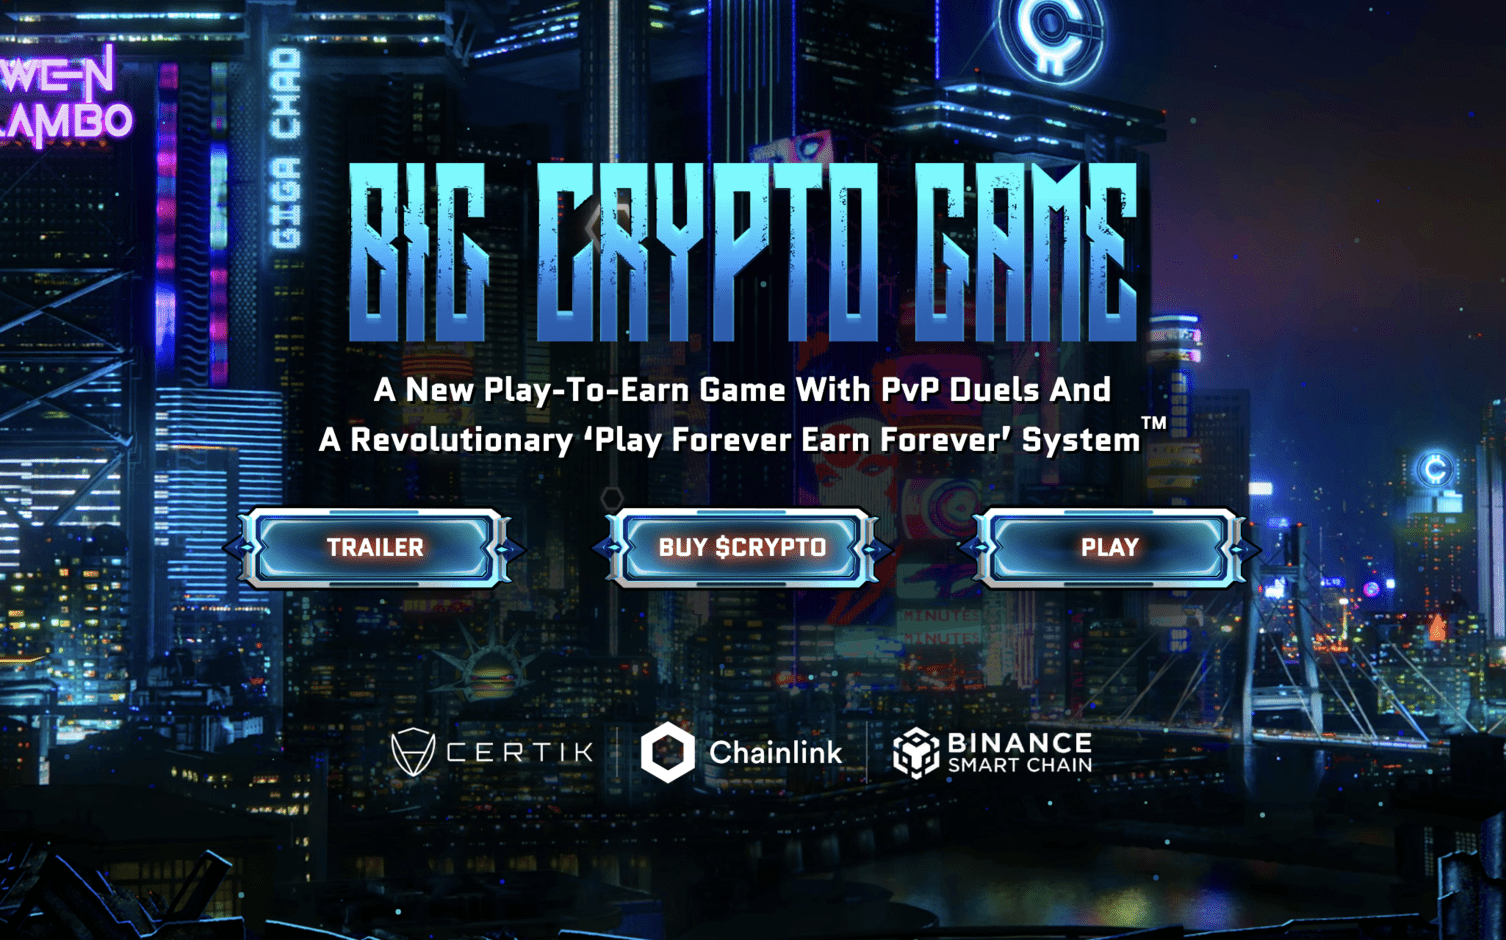 Big Crypto Game cover